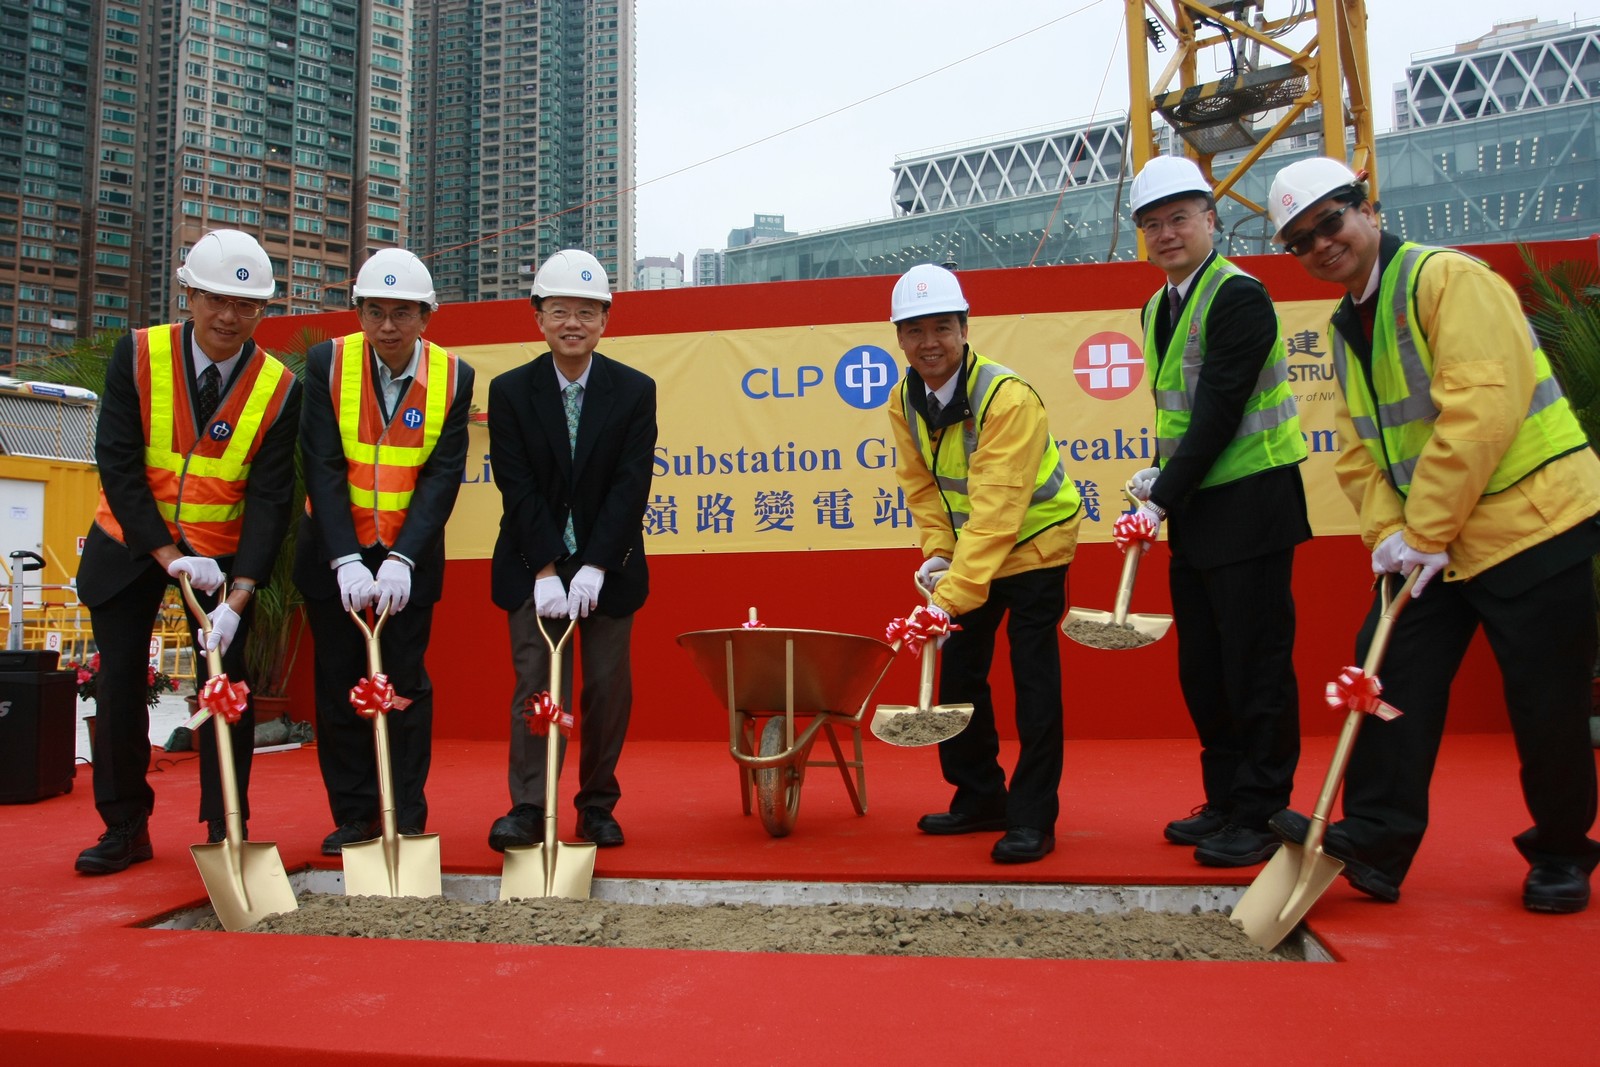 Managing Director Mr. Chu Tat-chi (3rd left) together with top management of CLP and ALKF+ to officiate the ceremony